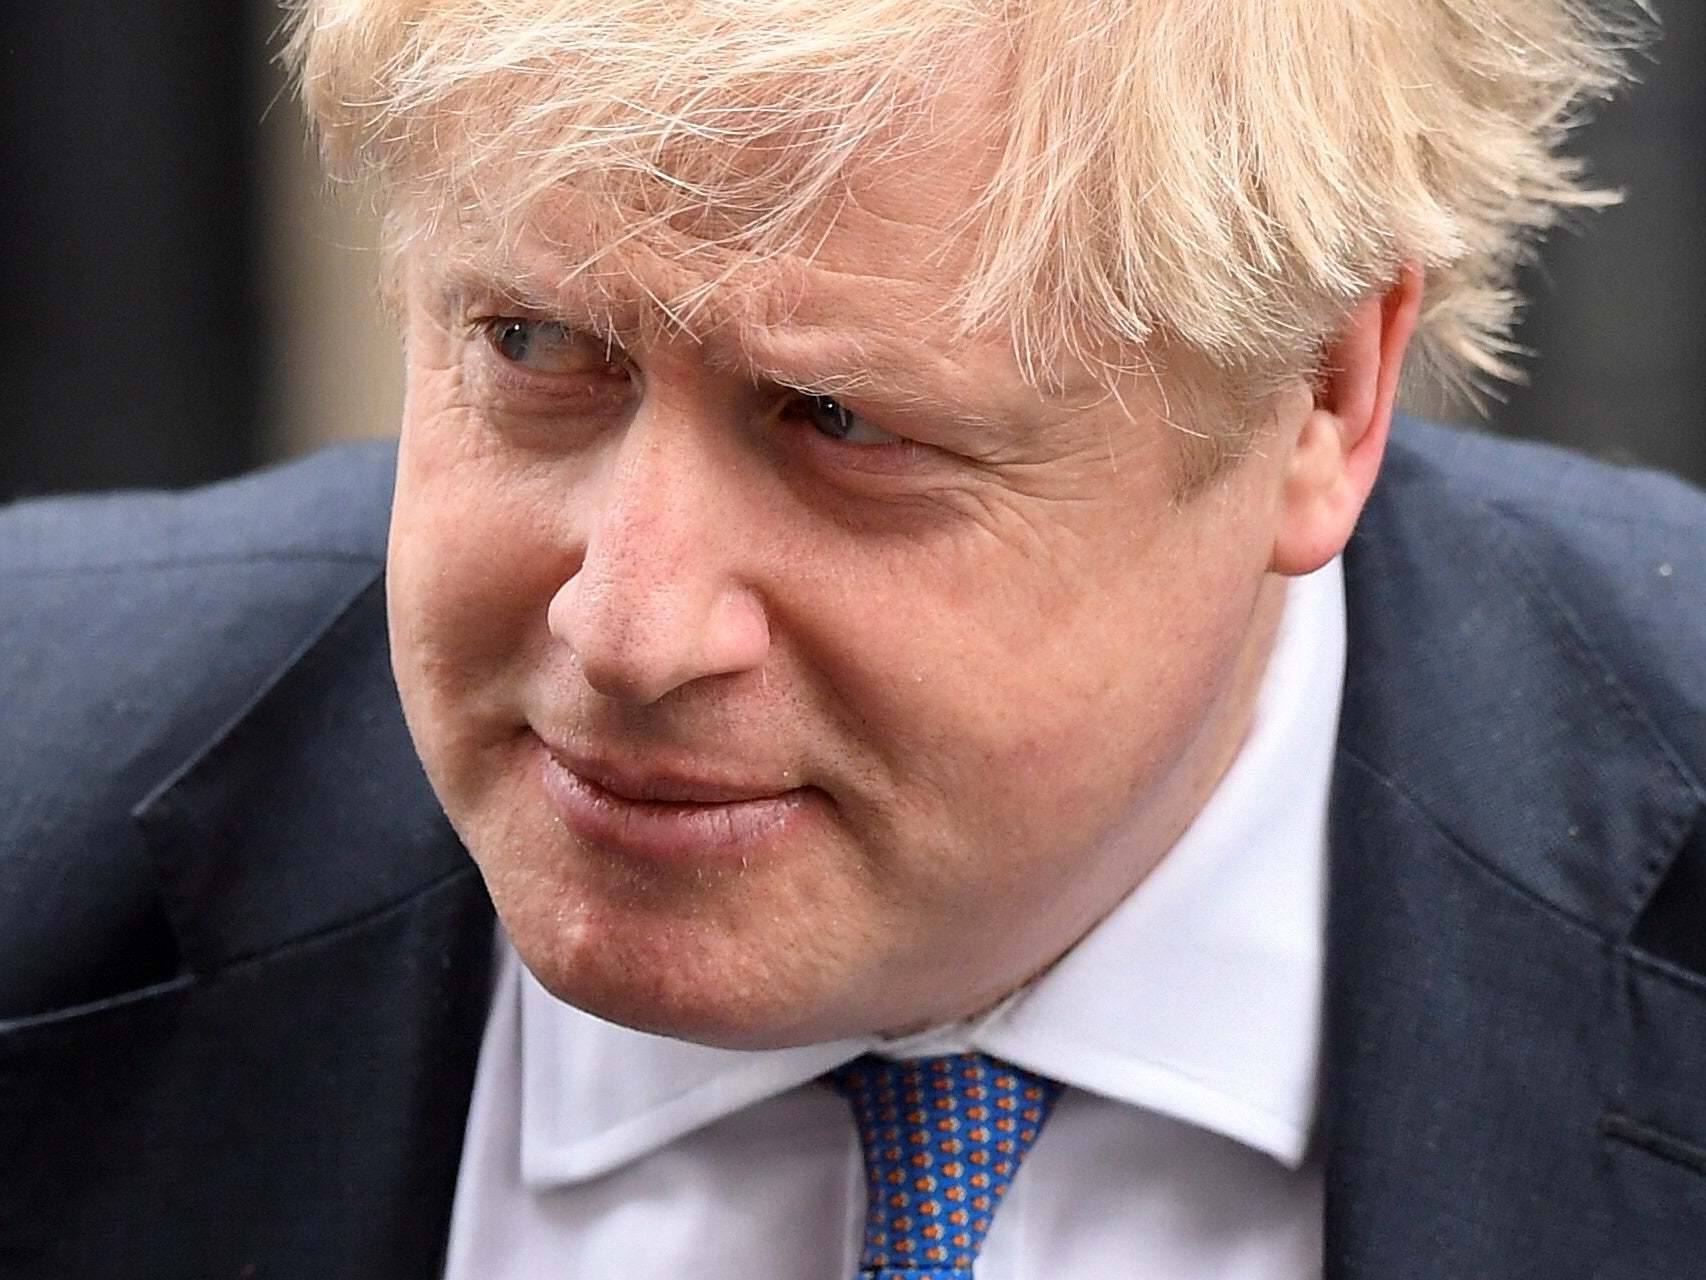 The staffing crisis facing the NHS and social care sector was already acute long before Boris Johnson came up with his eye-catching plan to boost nursing staffing